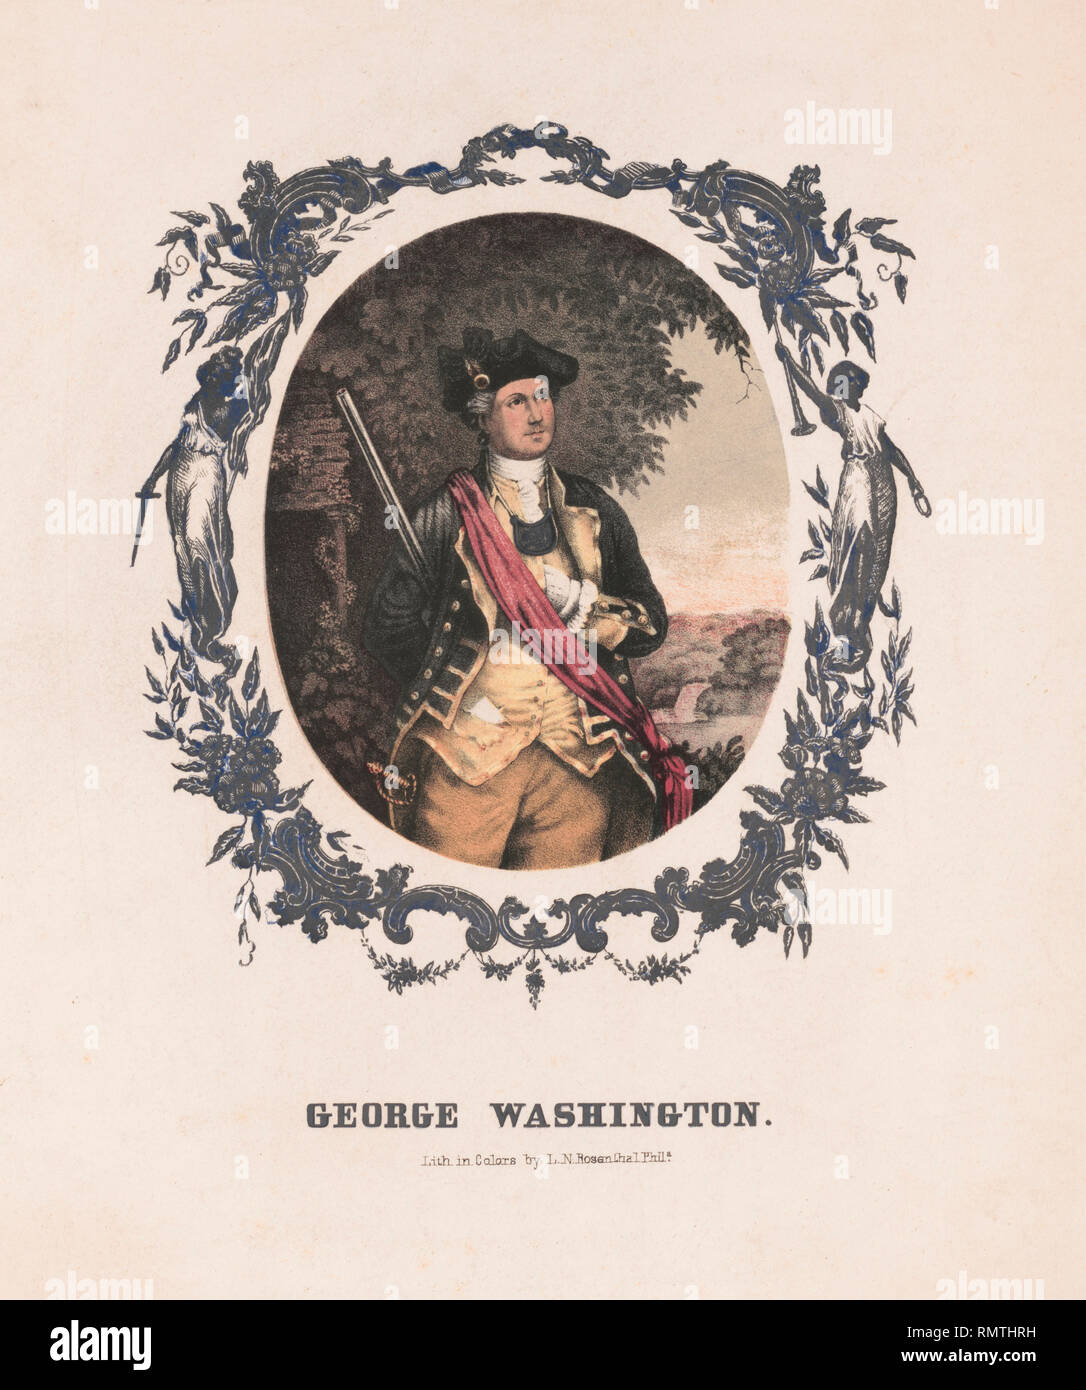 George Washington (1732-99), First President of the United States, Three-Quarter Length Portrait in Uniform, Lithograph by Louis N. Rosenthal, Philadelphia, 1850's Stock Photo